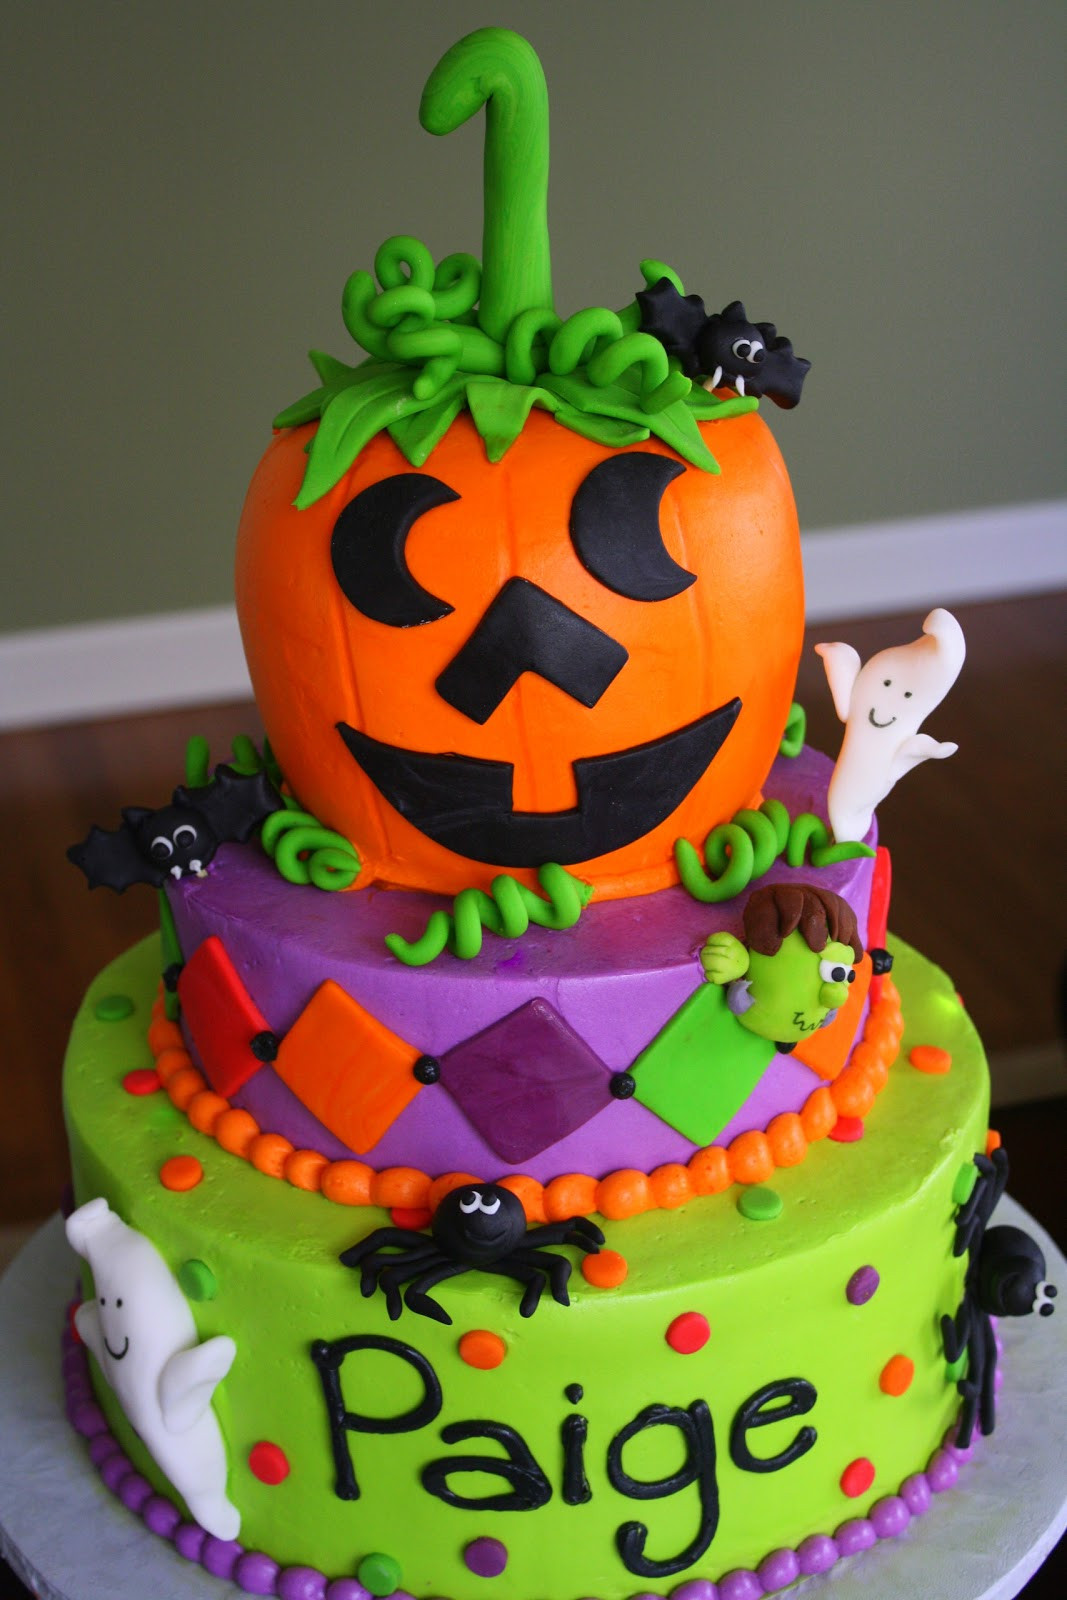 Little Halloween Cakes to Make Your Day Spooktacular!